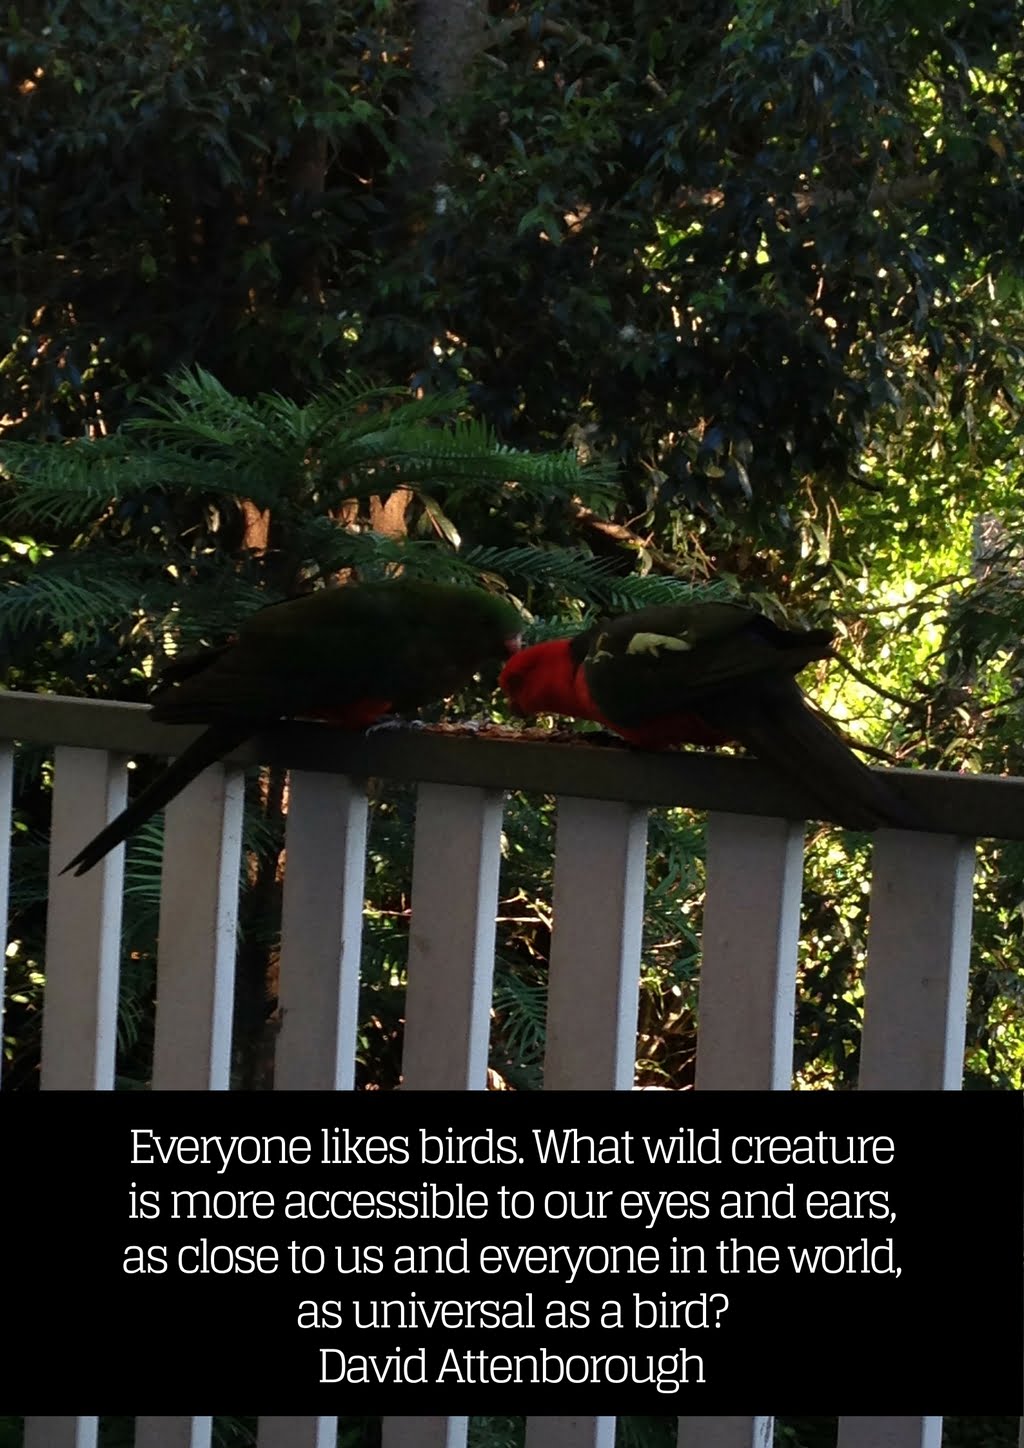 King Parrots eating seed with the David Attenborough quote Everyone likes birds. What wild creature is more accessible to our eyes and ears, as close to us and everyone in the world, as universal as a bird?